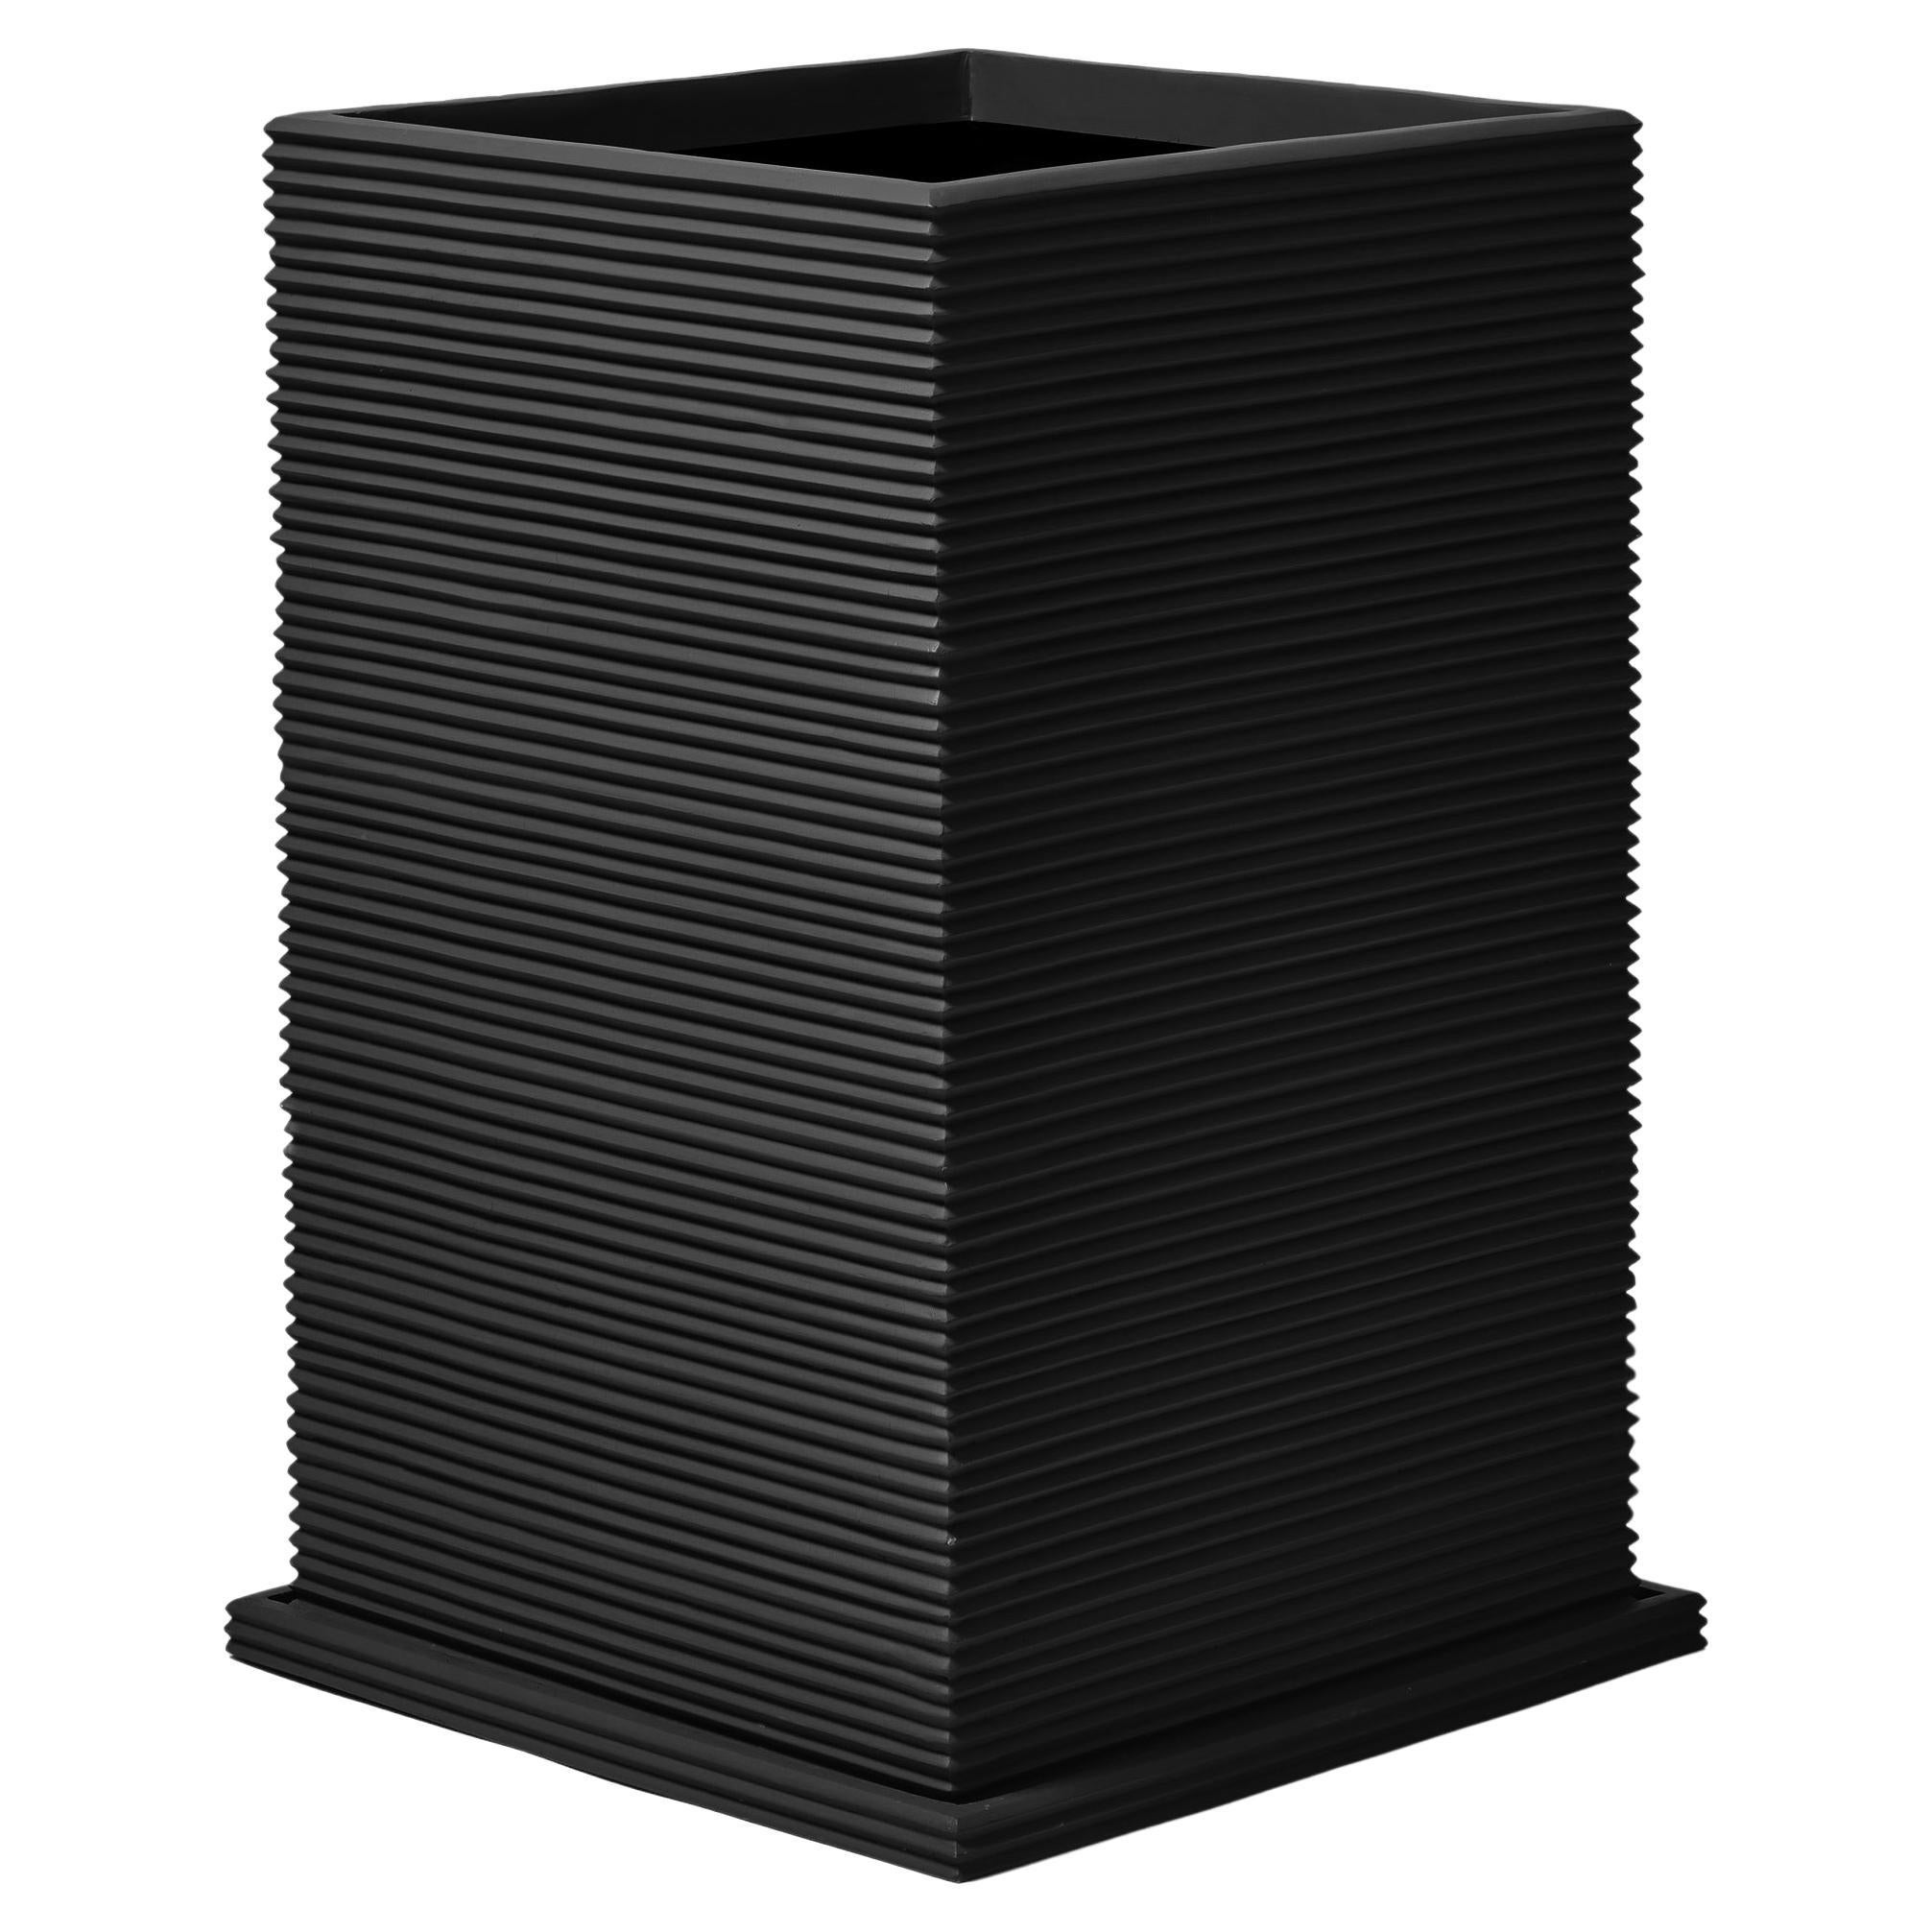 Oversize Tall Rectangular Planter 'Black' by TFM, Represented by Tuleste Factory